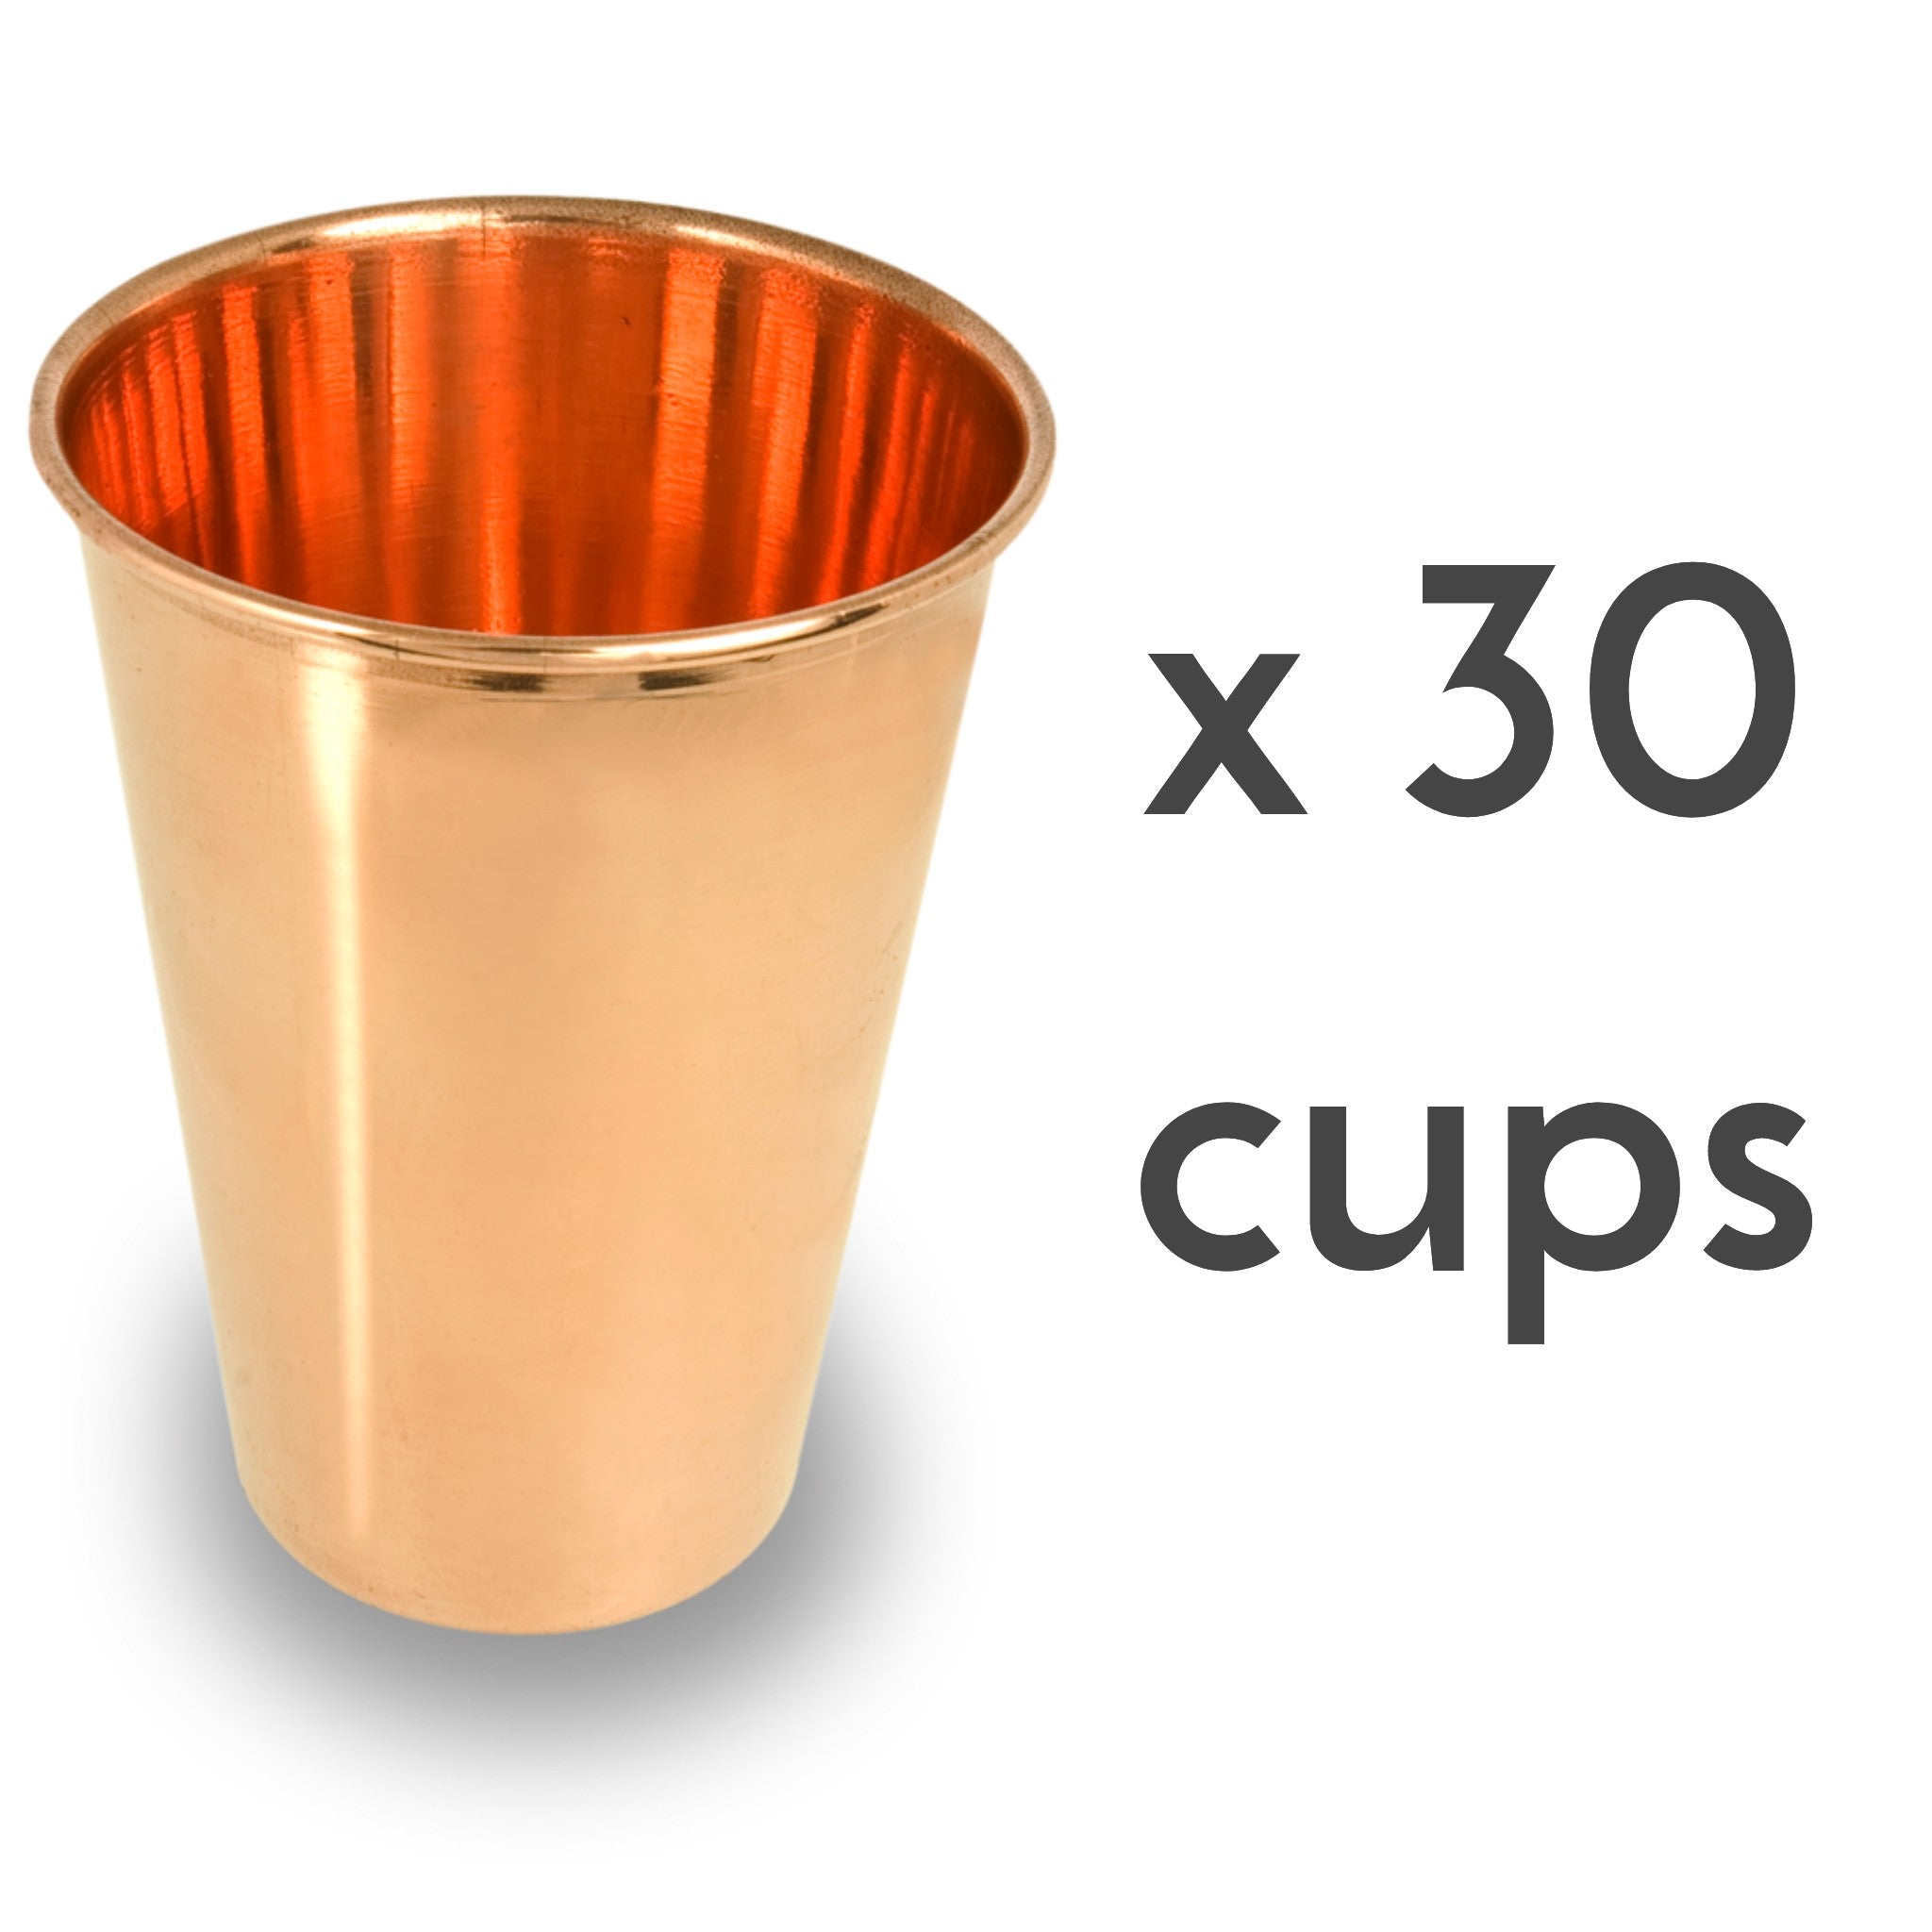 Ayurvedic pure copper drinking cups 30 cups